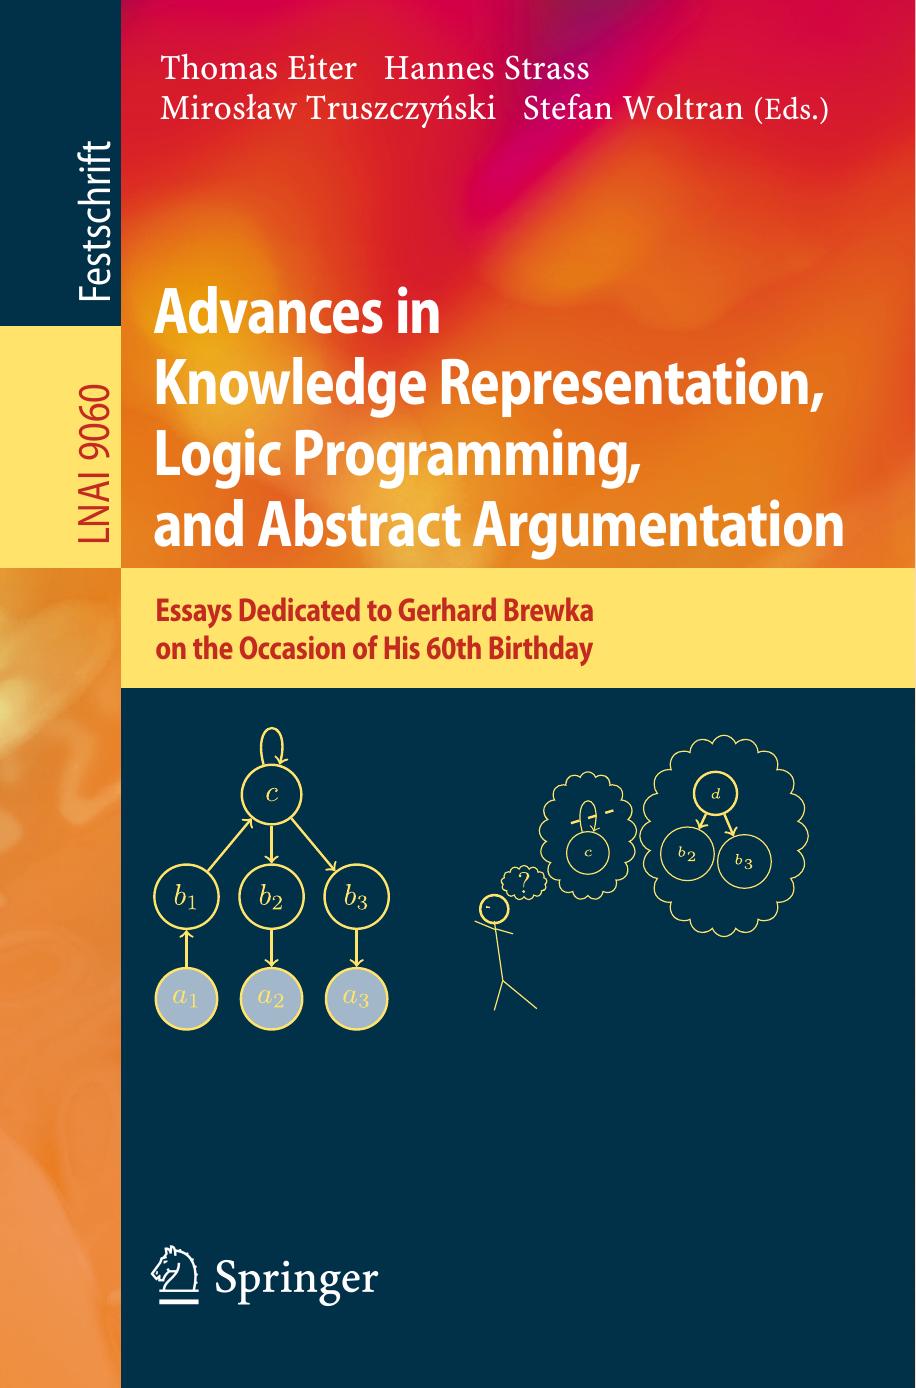 Advances in Knowledge Representation, Logic Programming, and Abstract Argumentation: Essays Dedicated to Gerhard Brewka on the Occasion of His 60th Birthday